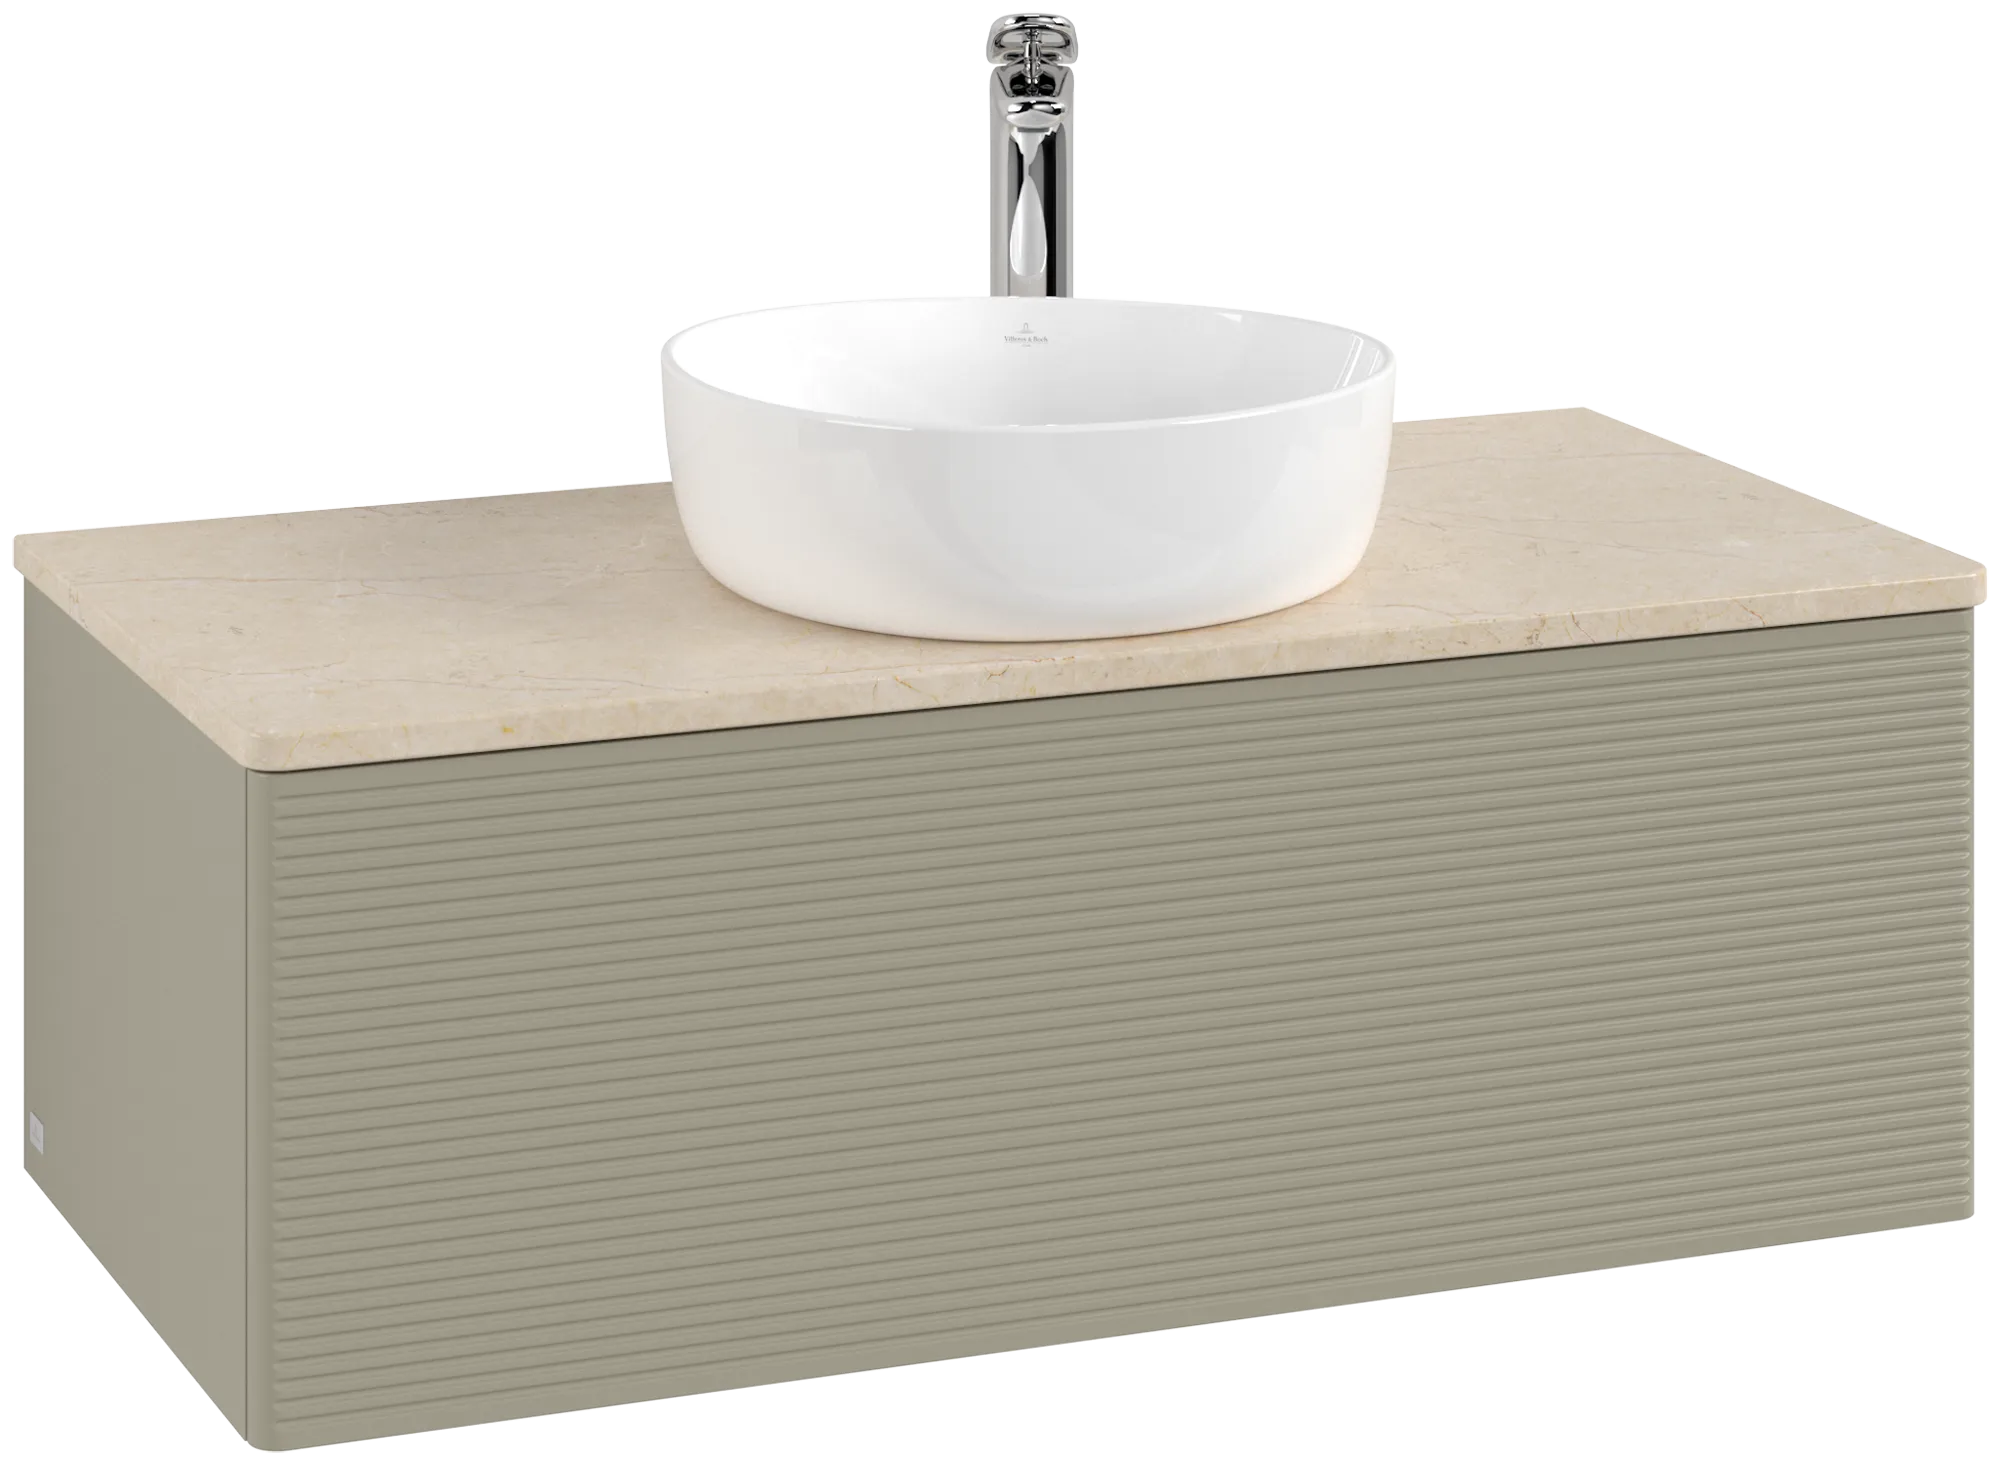 Picture of VILLEROY BOCH Antao Vanity unit, with lighting, 1 pull-out compartment, 1000 x 360 x 500 mm, Front with grain texture, Stone Grey Matt Lacquer / Botticino #L31153HK